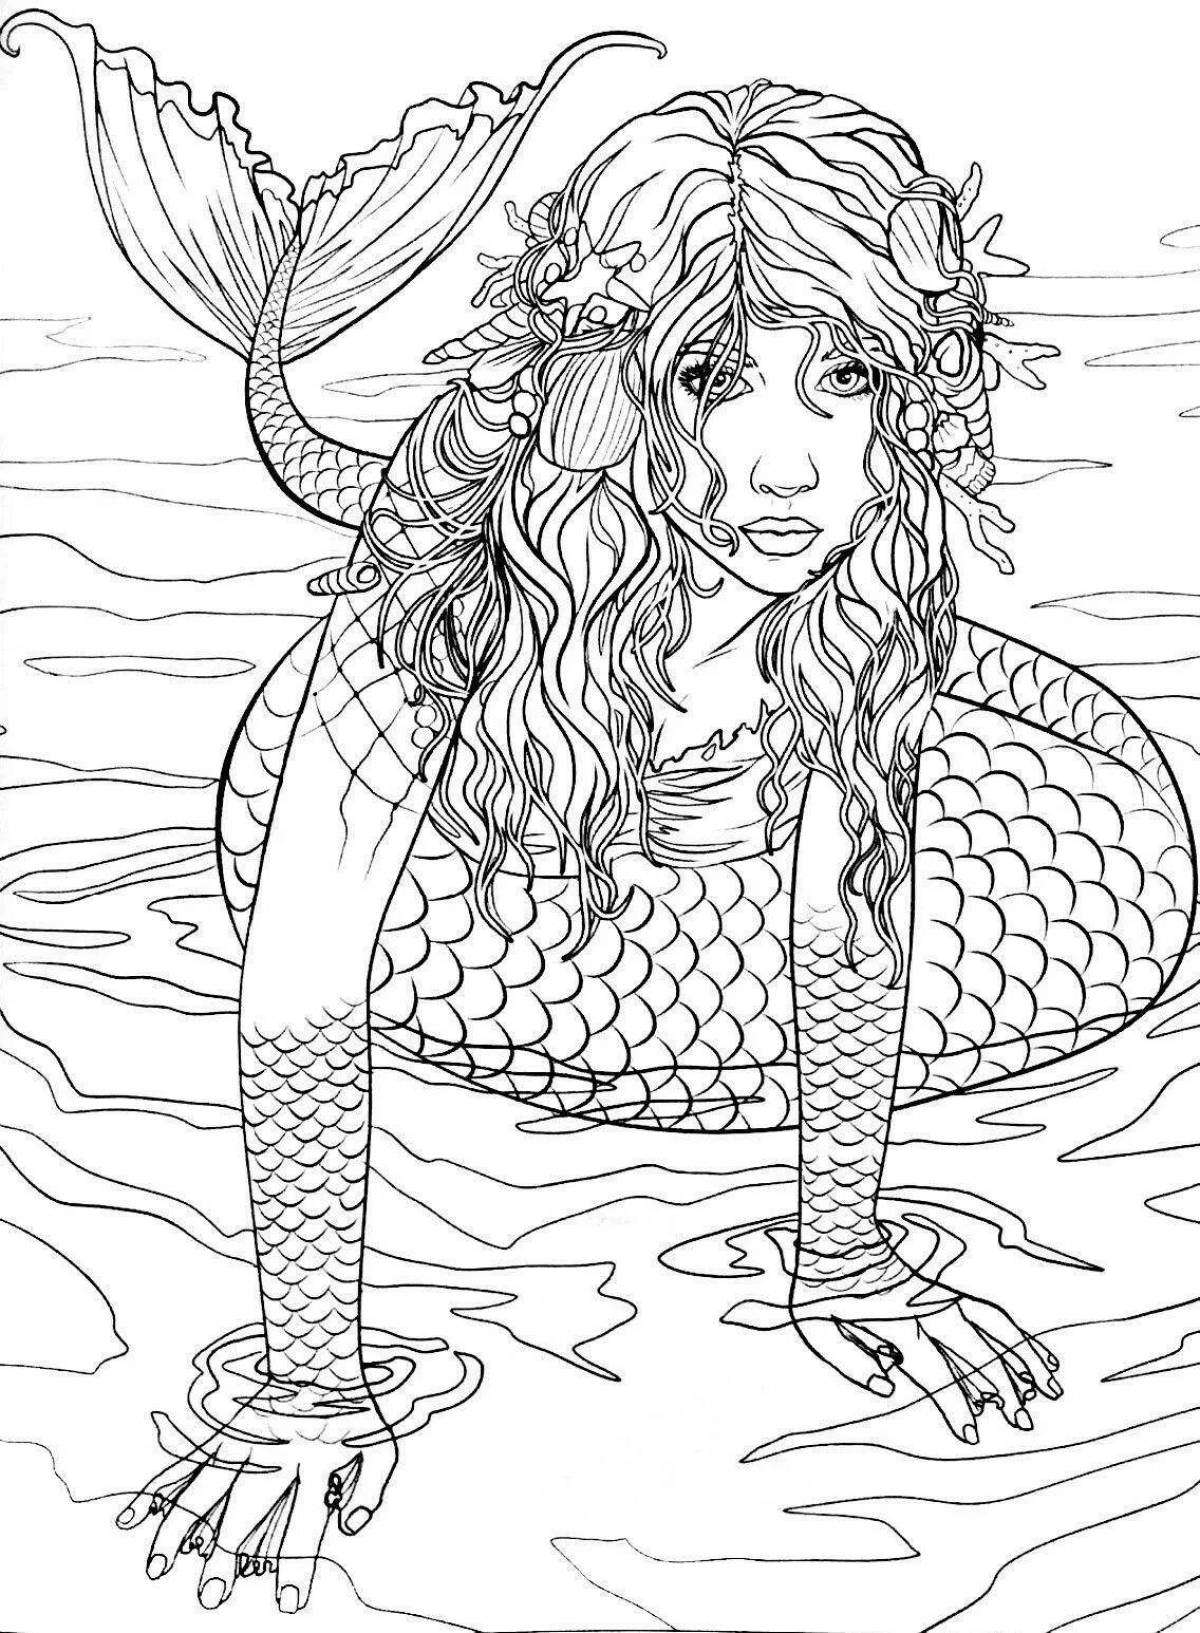 Amazing big siren coloring page